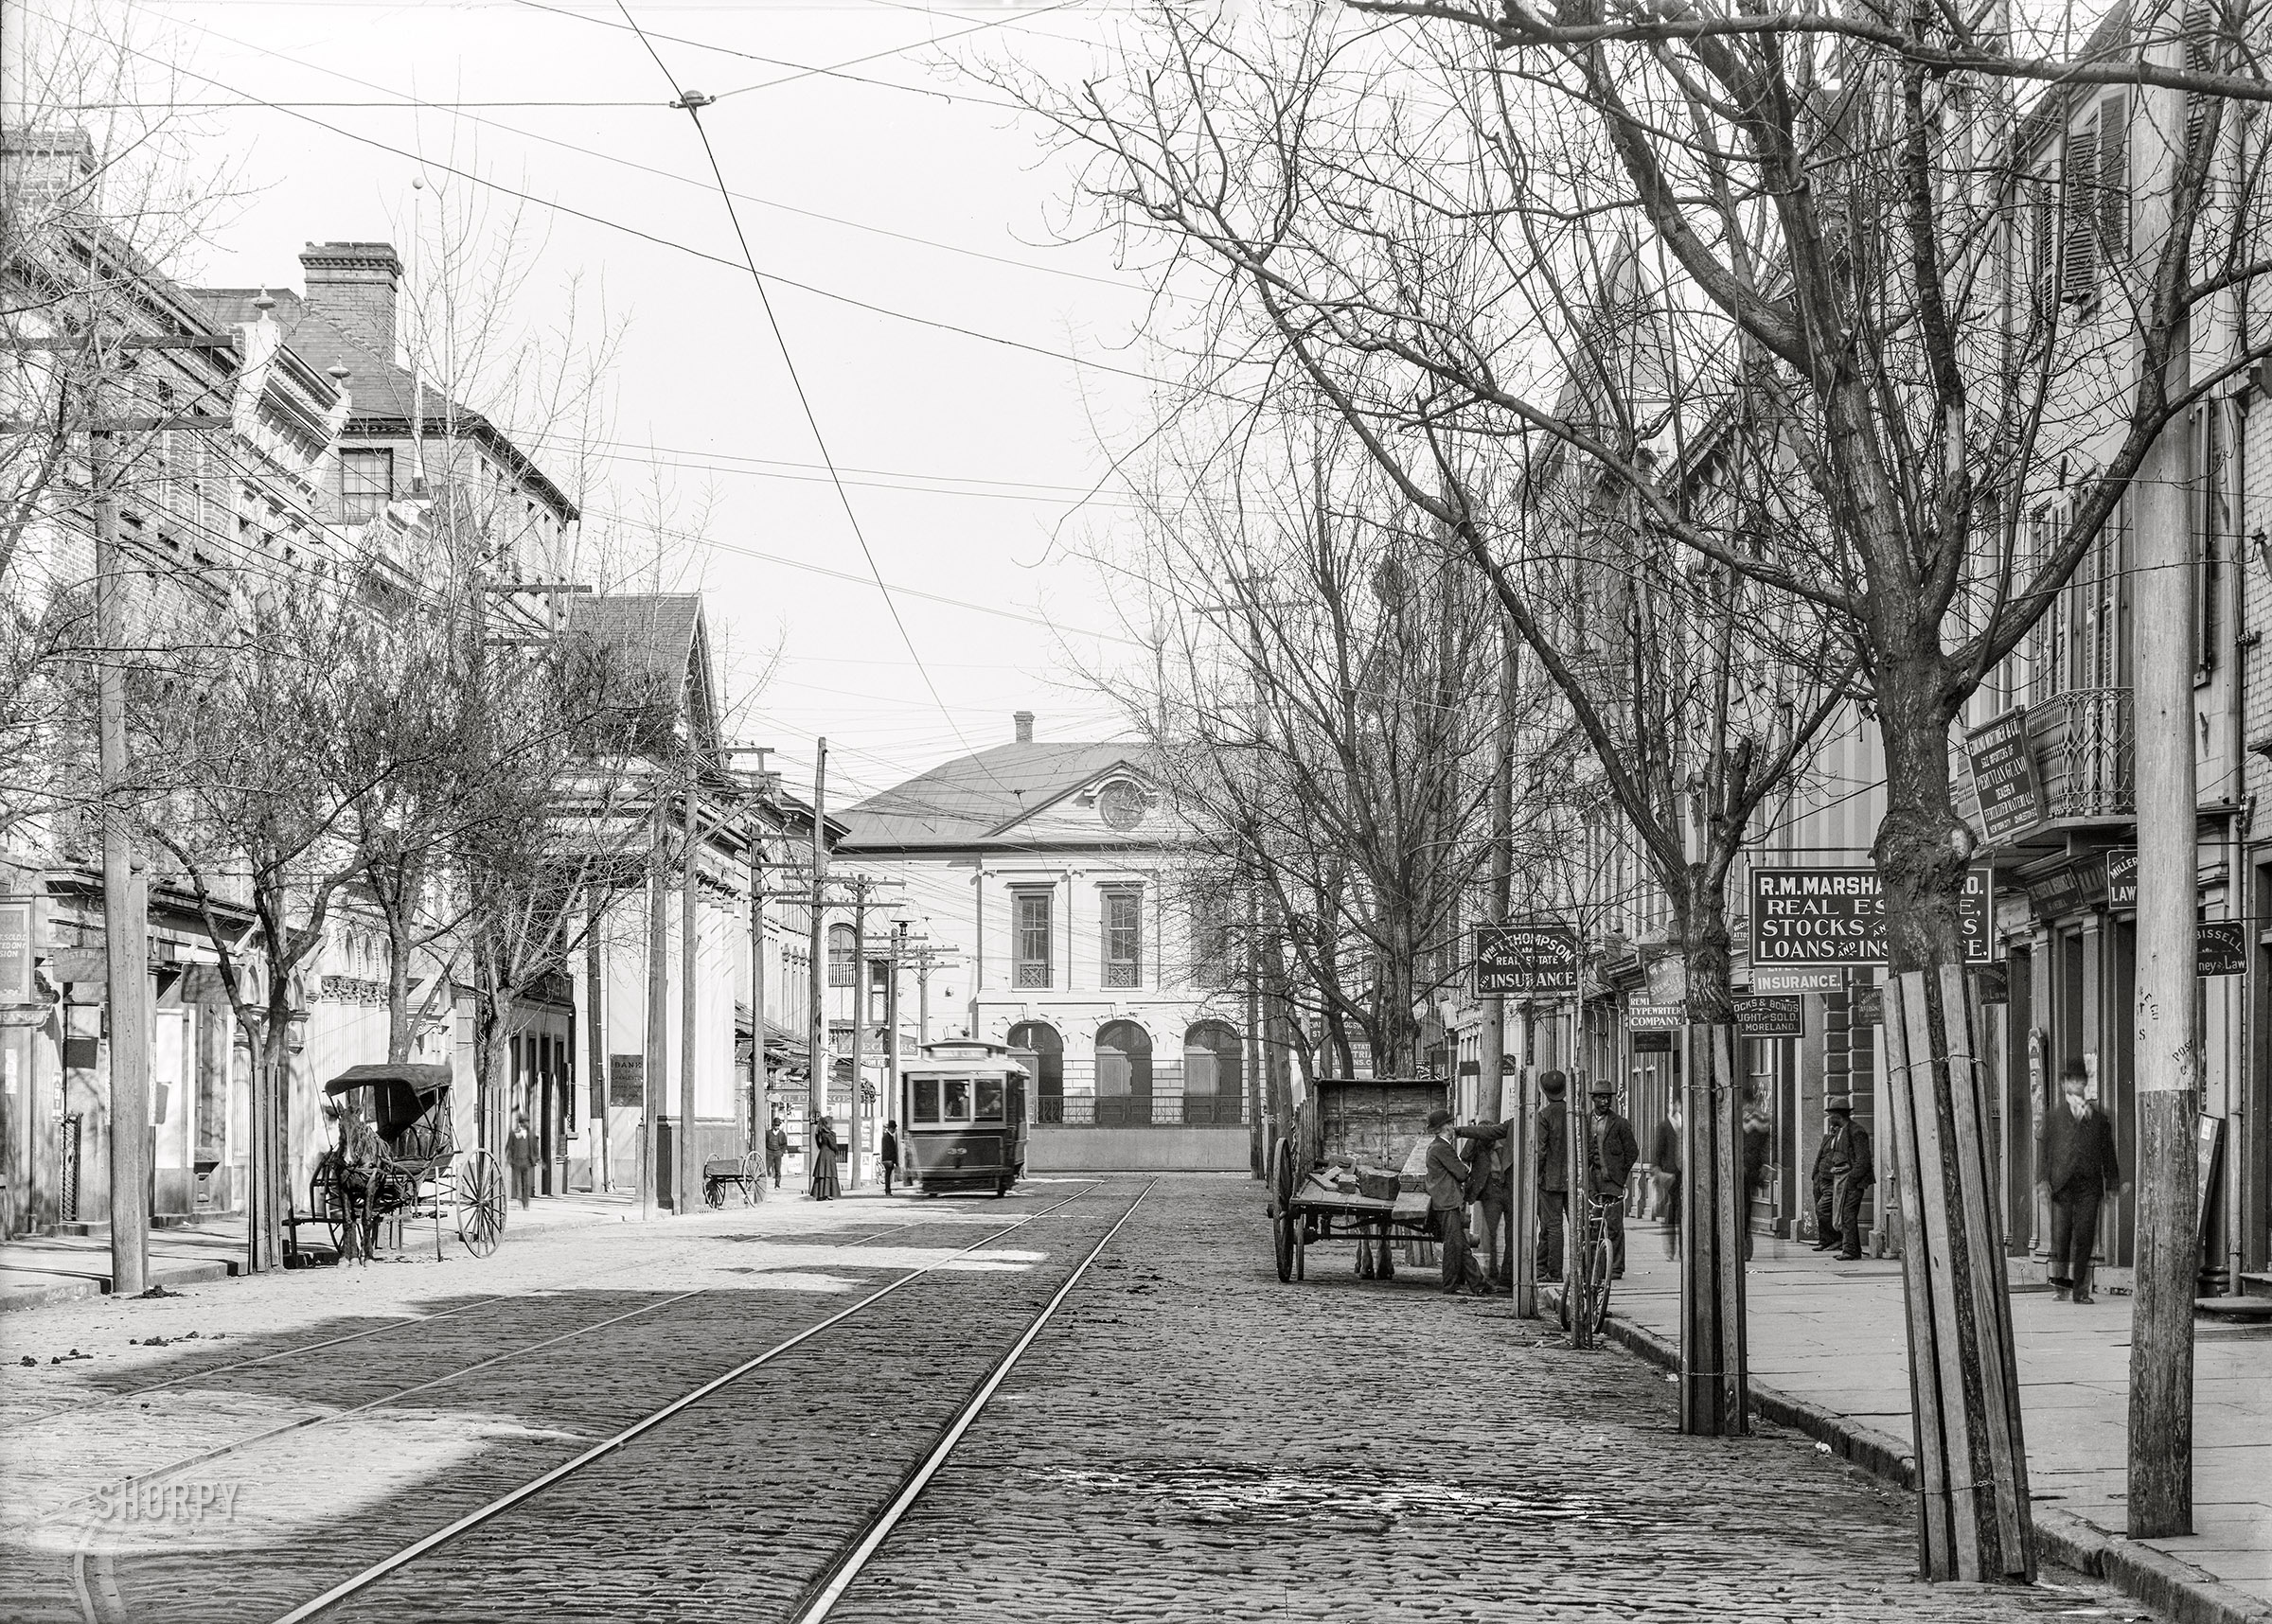 1906. Charleston, South Carolina. "East Broad Street." With a view of the Exchange Building & Custom House. 5x7 inch dry plate glass negative, Detroit Publishing Company. View full size.